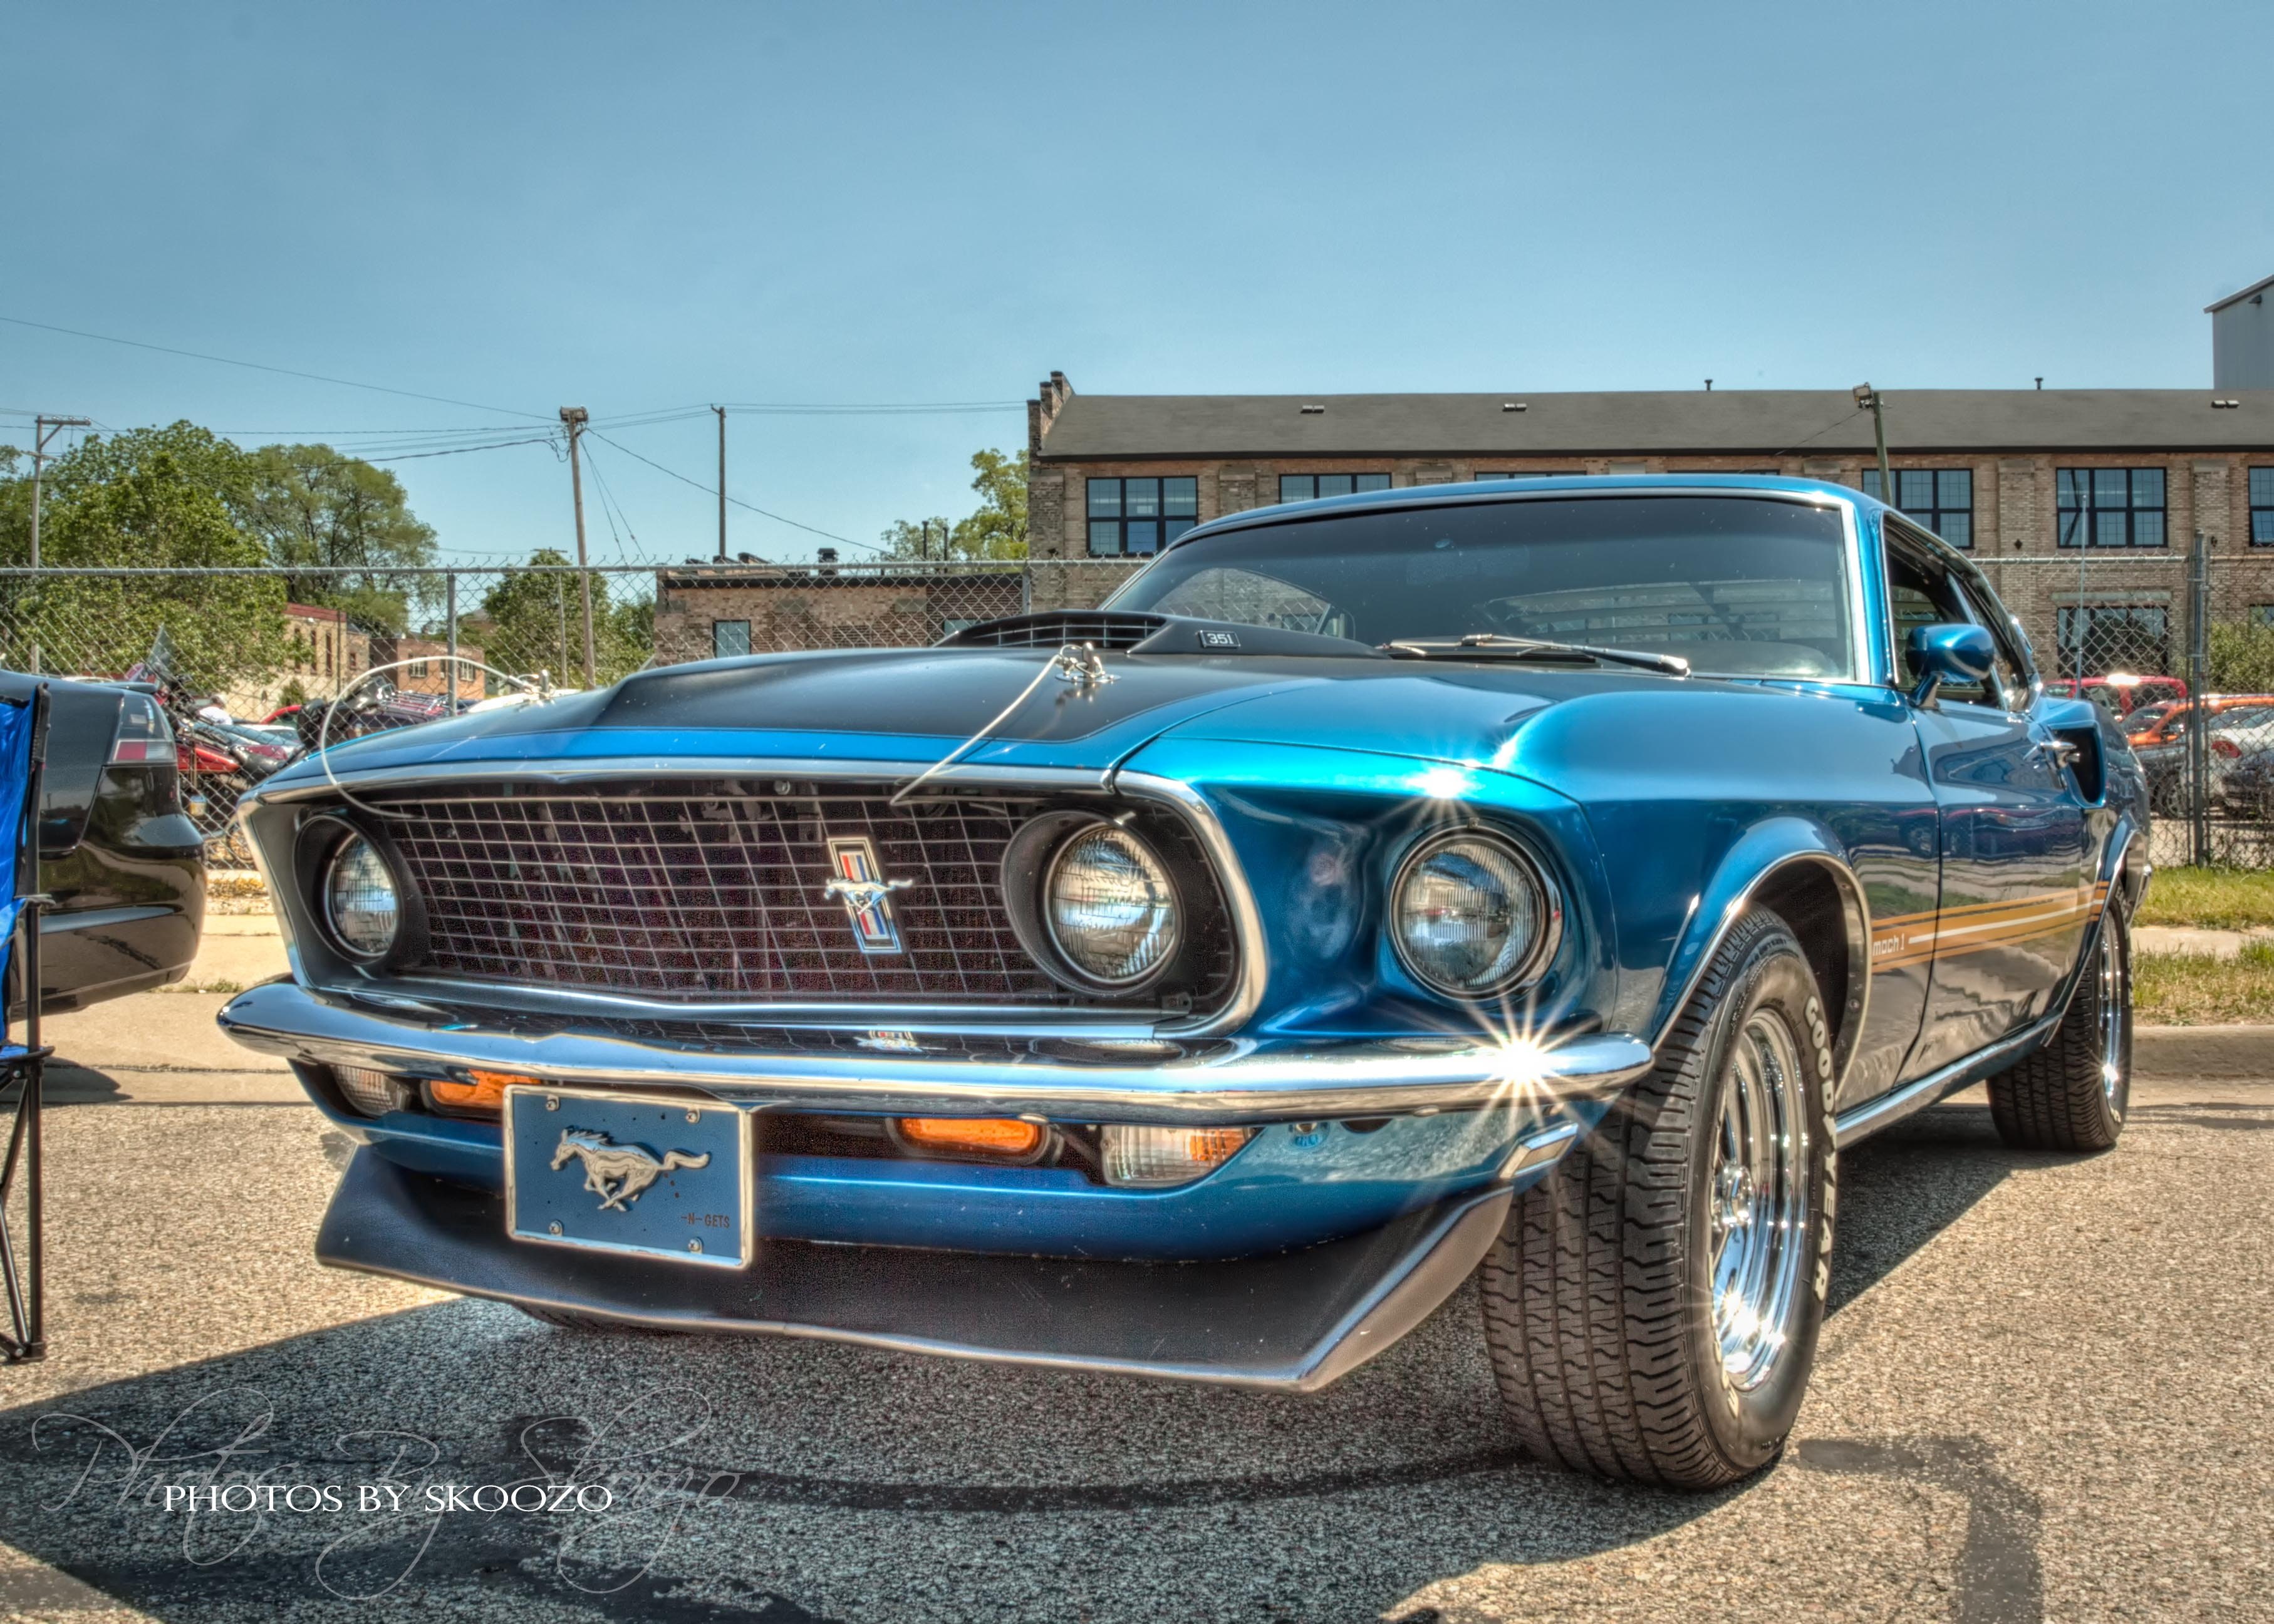 1969, 428, cars, classic, cobra, coupe, jet, mach, muscle, mustang